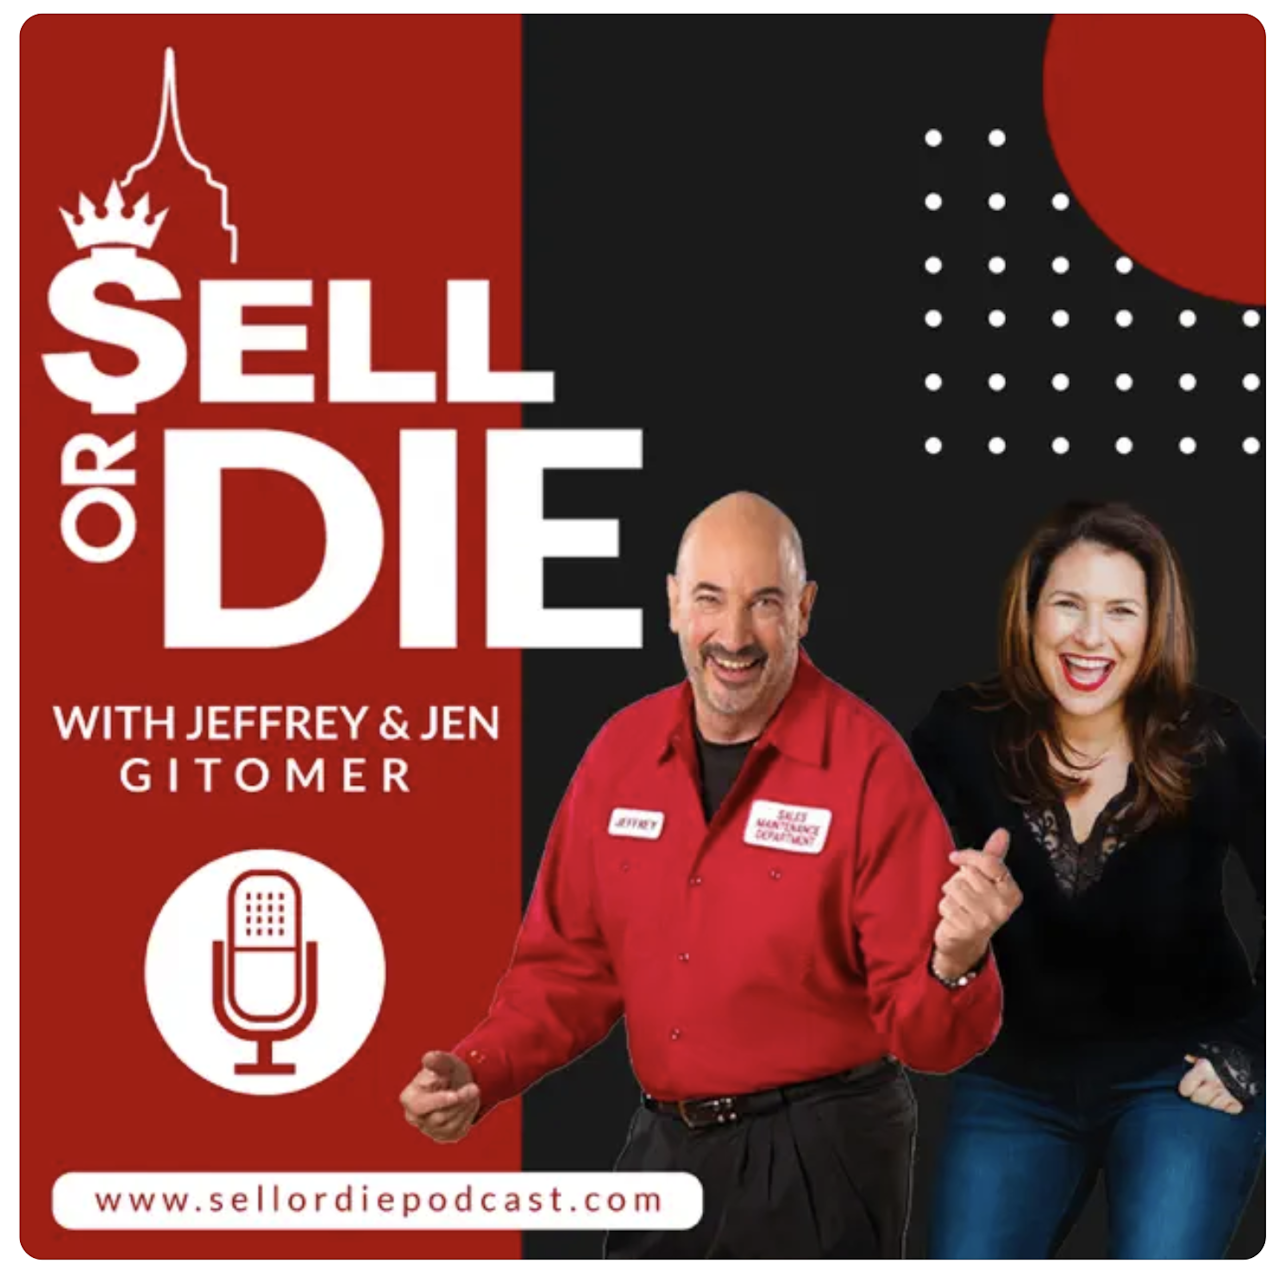 Best Sales Podcasts: Sell or Die